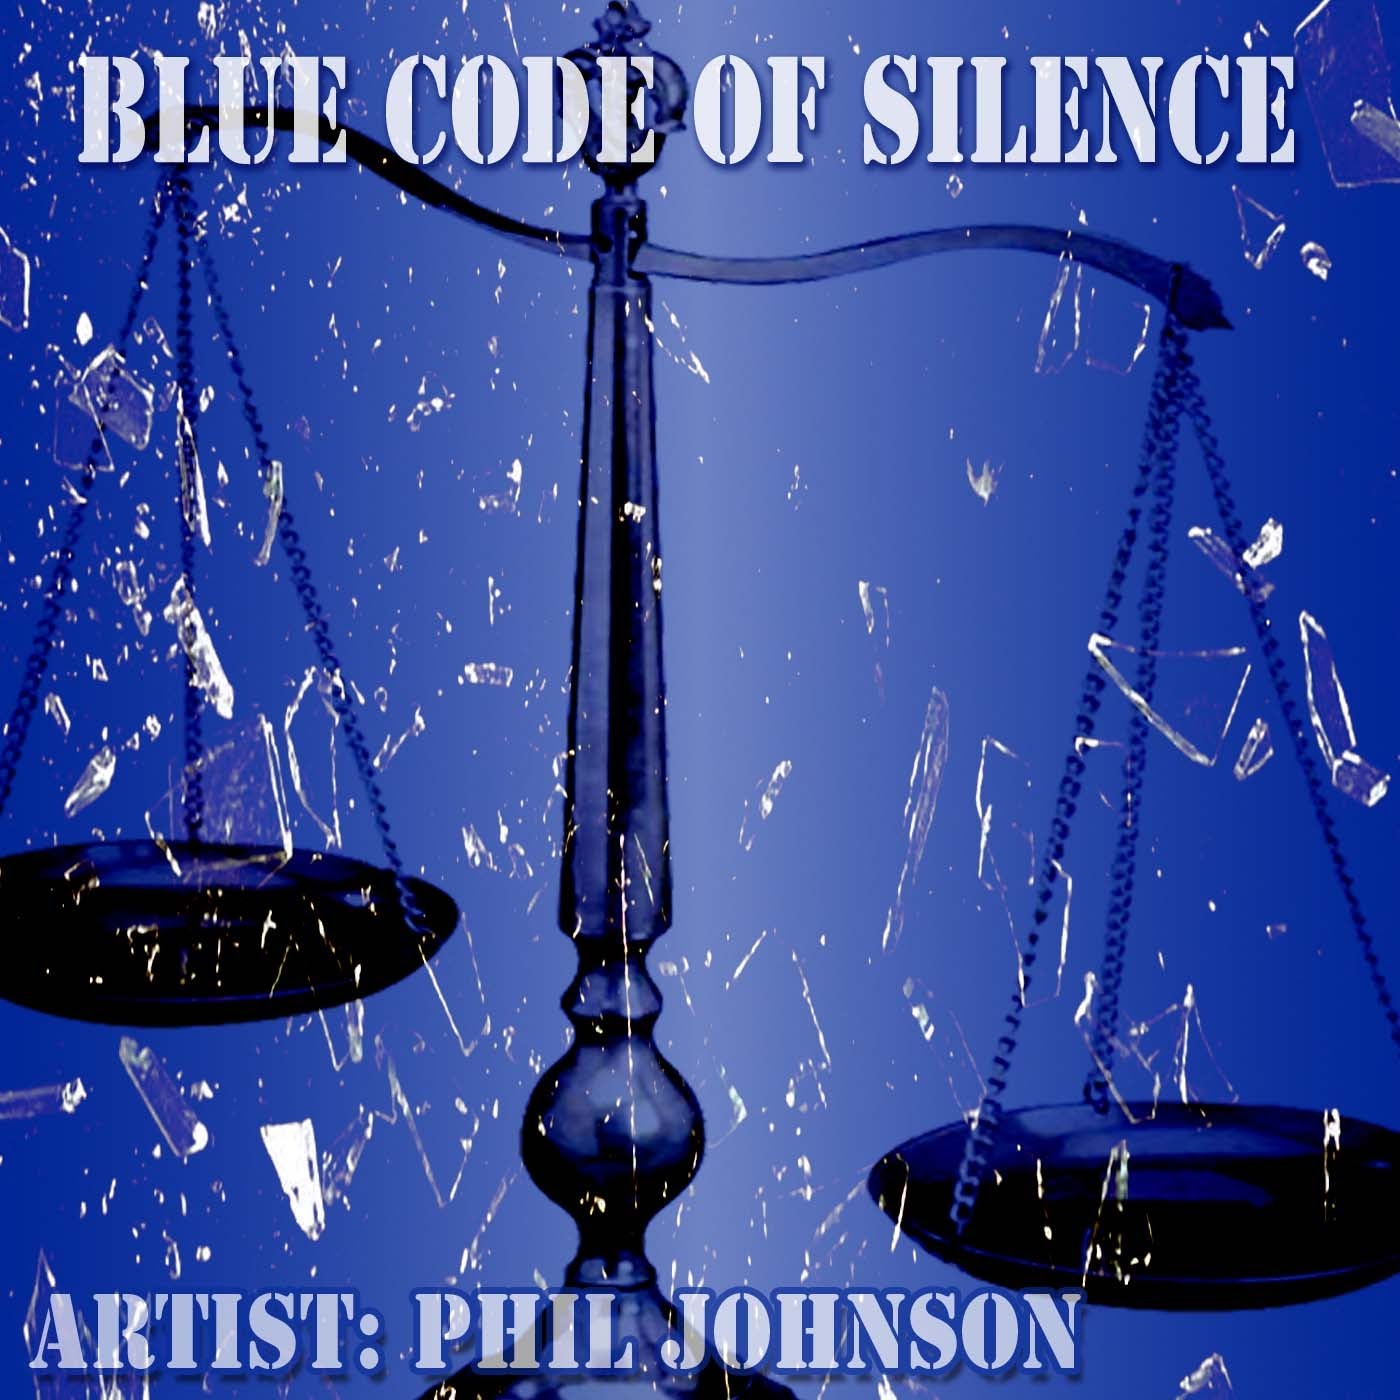 Phil Johnson Criticizes Police Brutality On His Latest Release Titled ”Blue Code Of Silence” FT Phil (Tre) 111